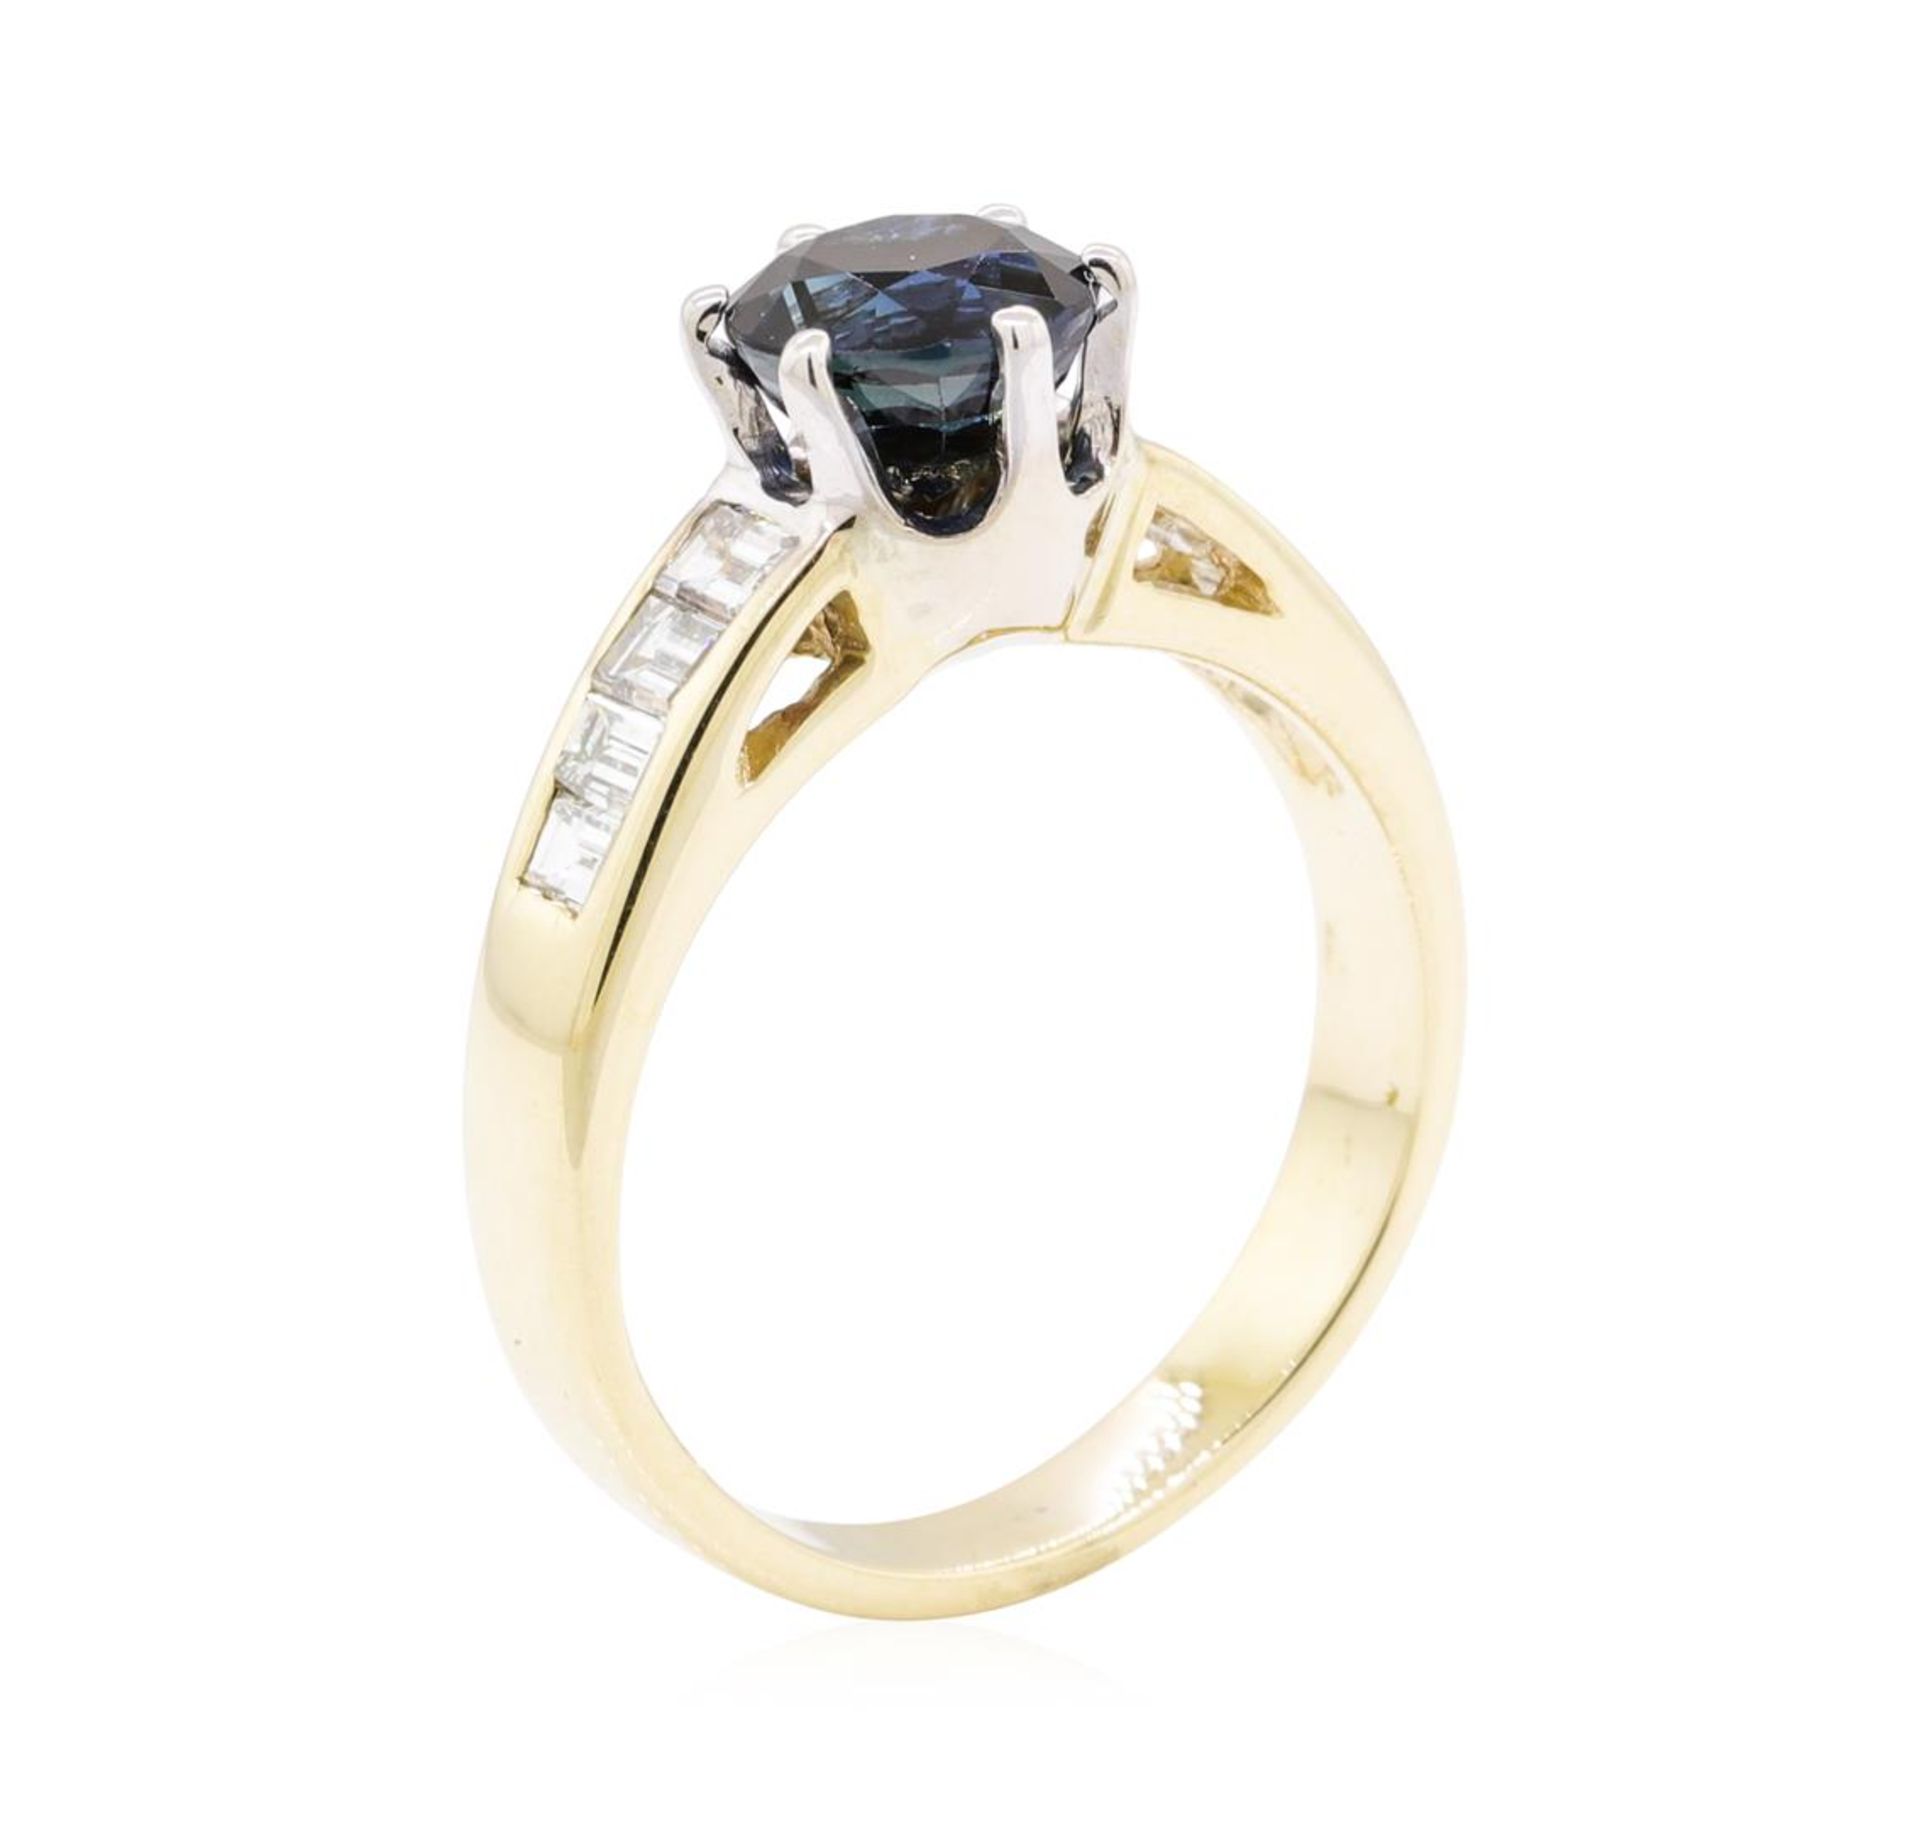 1.55ct Sapphire and Diamond Ring - 14KT Yellow and White Gold - Image 4 of 4